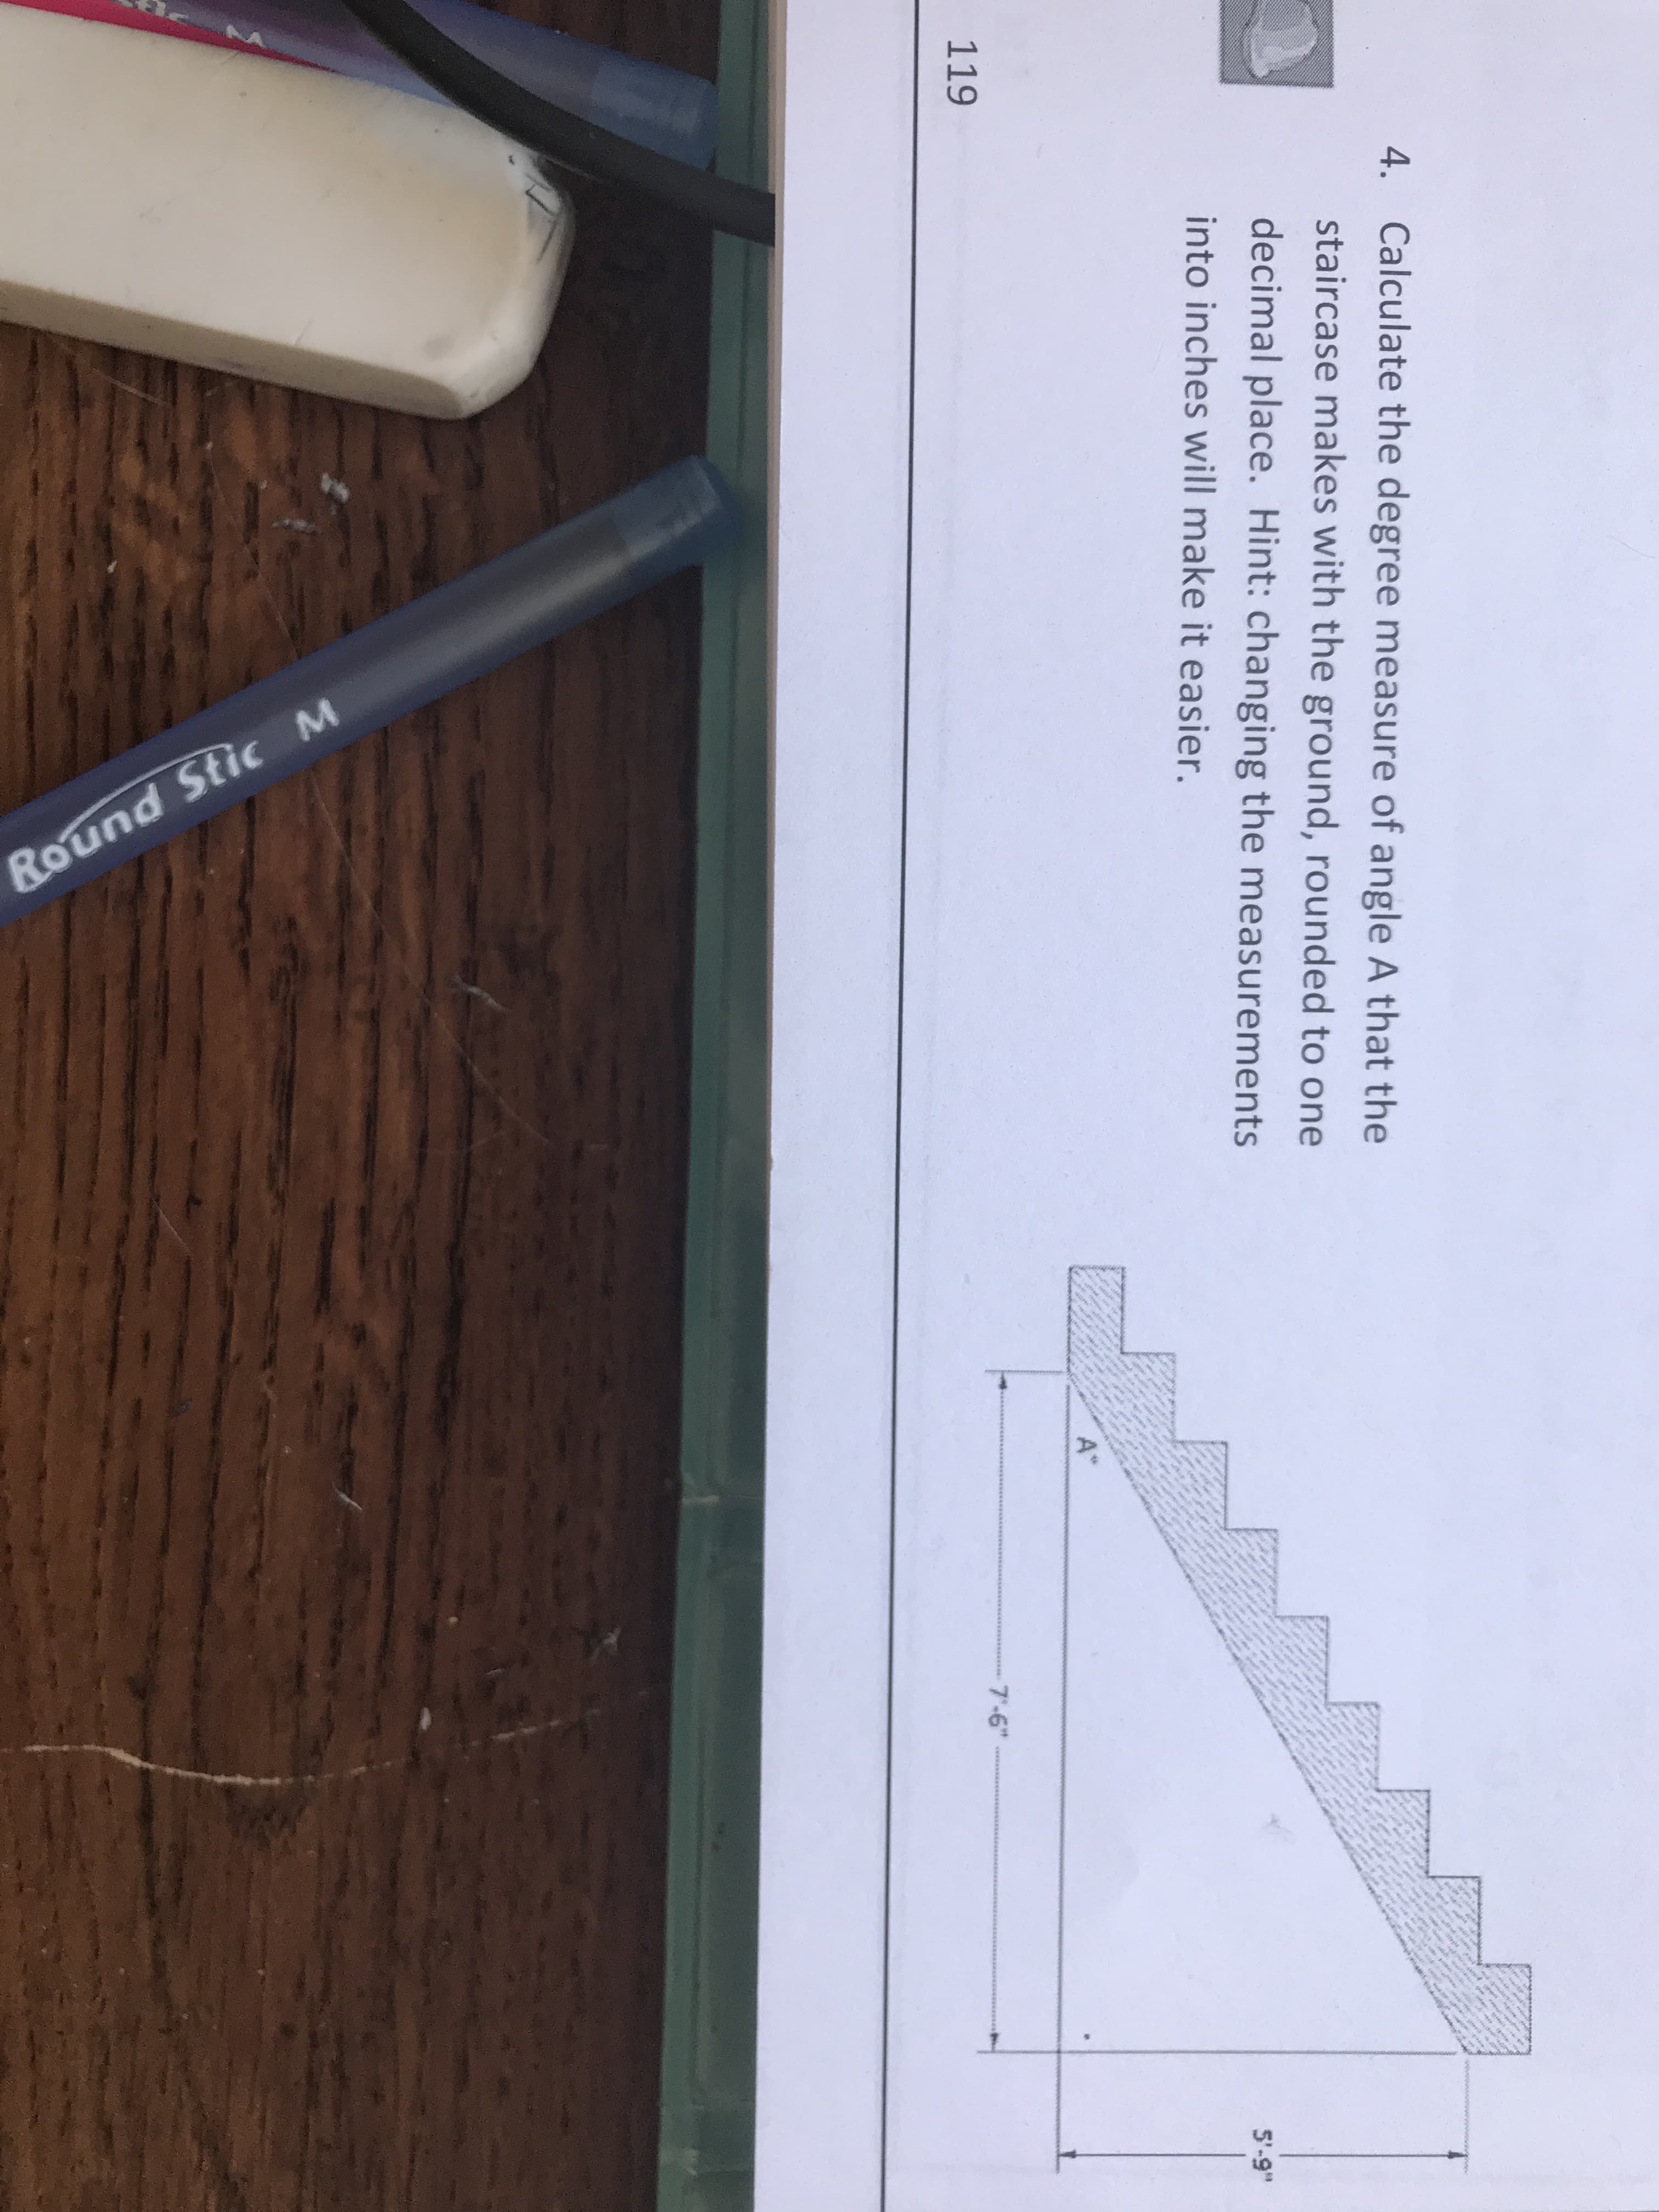 Calculate the degree measure of angle A that the
staircase makes with the ground, rounded to one
decimal place. Hint: changing the measurements
into inches will make it easier.
4.
5'-9"
7'-6"
119
